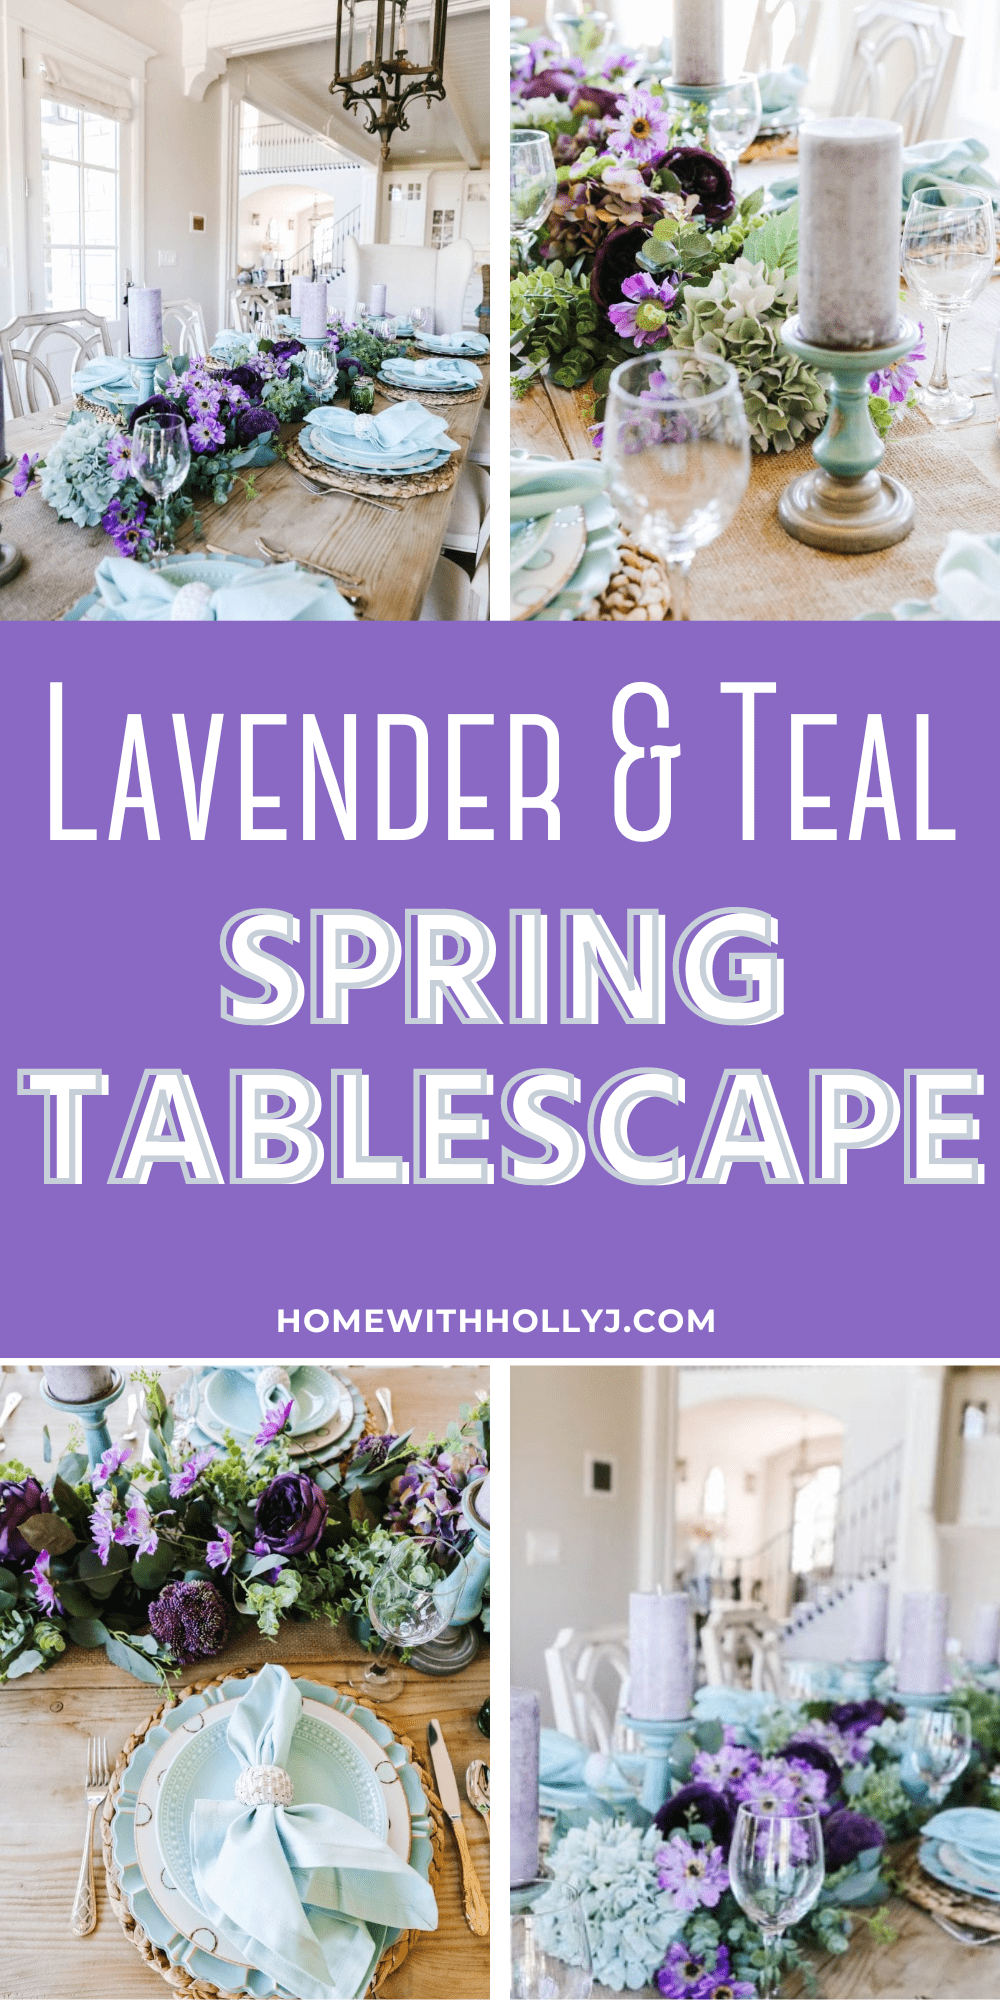 A pastel mix of teal and lavender that will bring you right into Easter and Spring. Sharing a spring tablescape you don't want to miss.